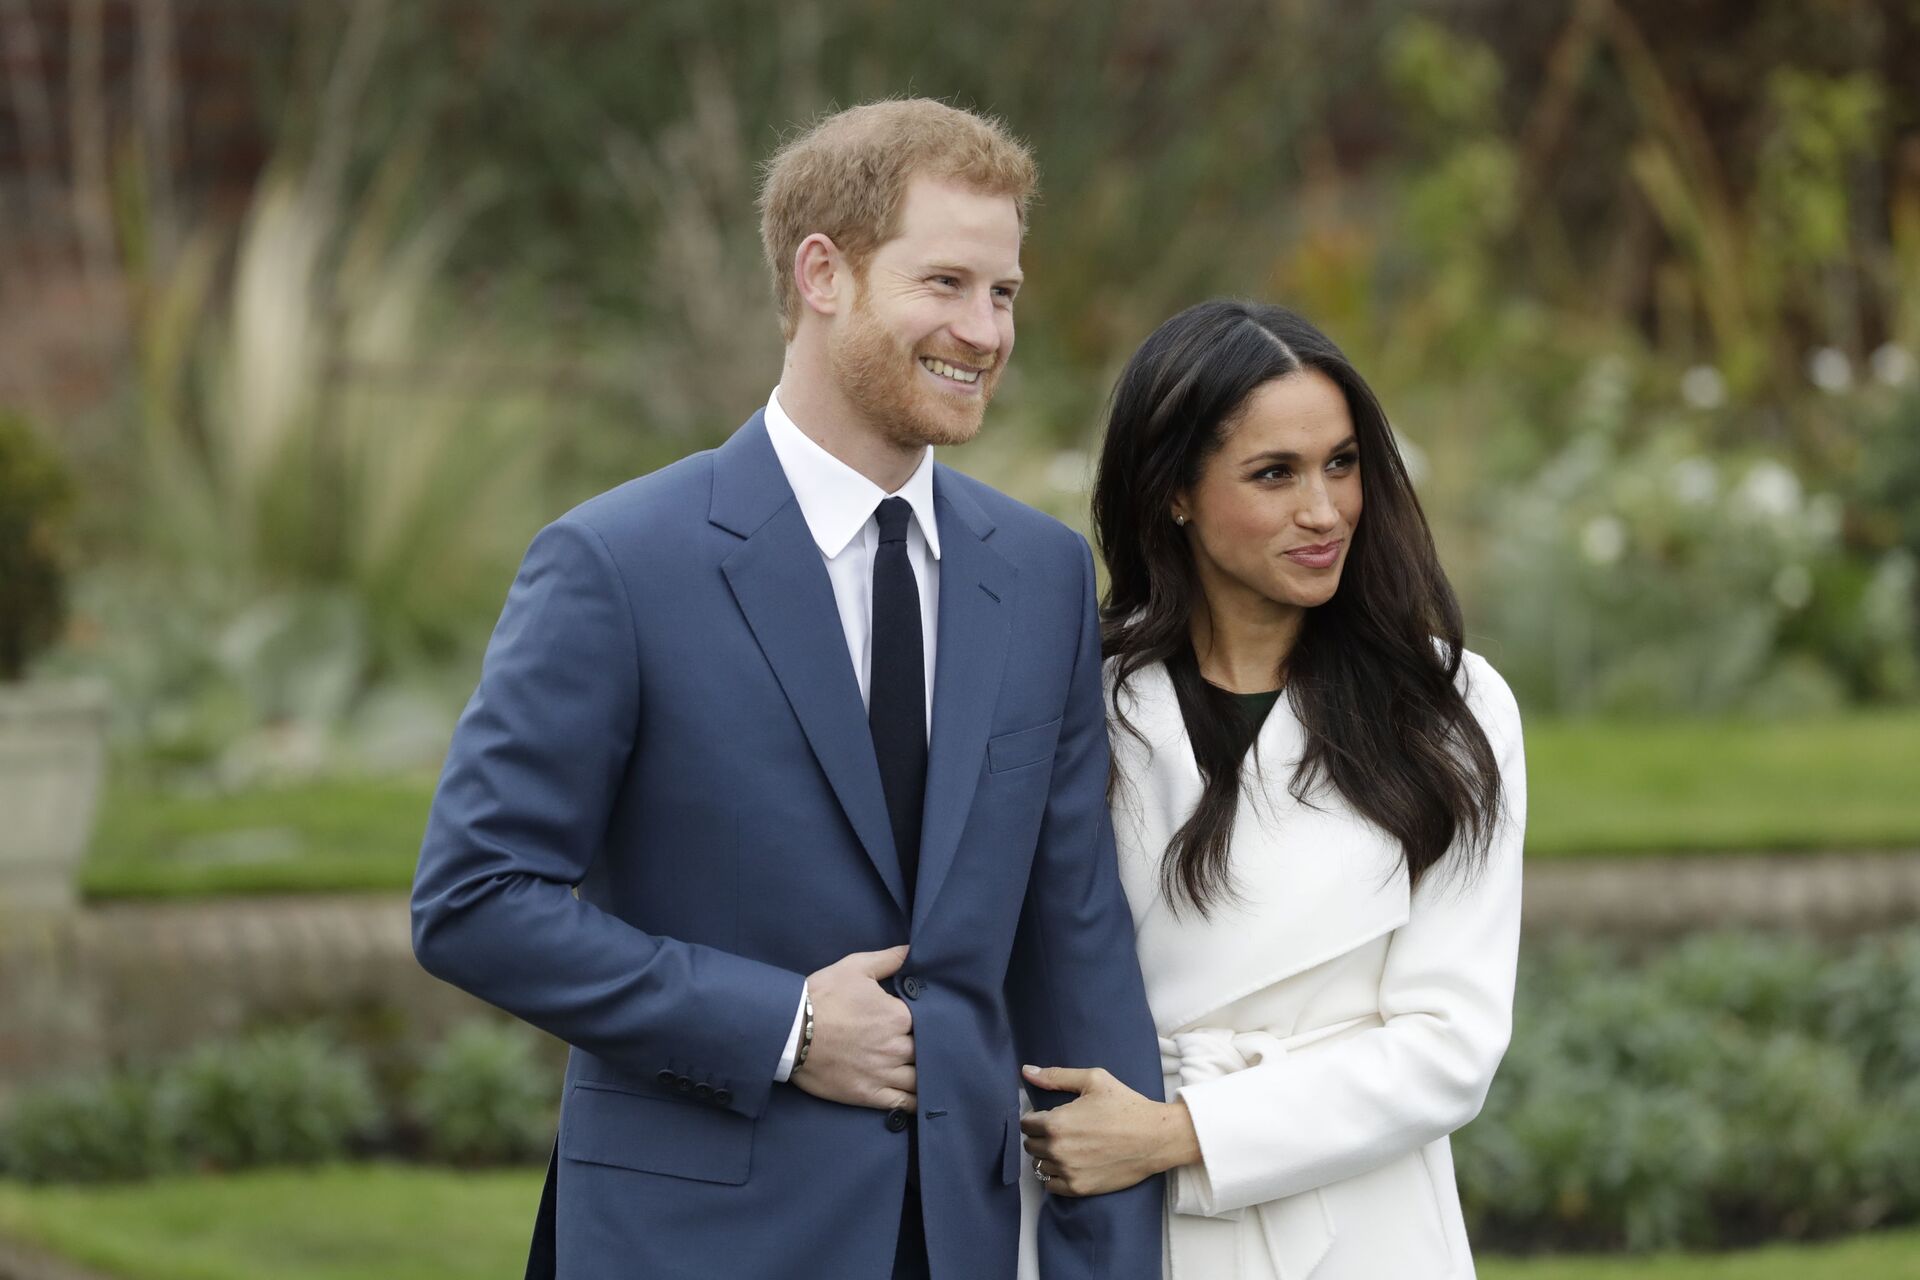 Britain's Prince Harry and his fiancee Meghan Markle pose for photographers during a photocall in the grounds of Kensington Palace in London, Monday Nov. 27, 2017 - Sputnik International, 1920, 01.12.2021